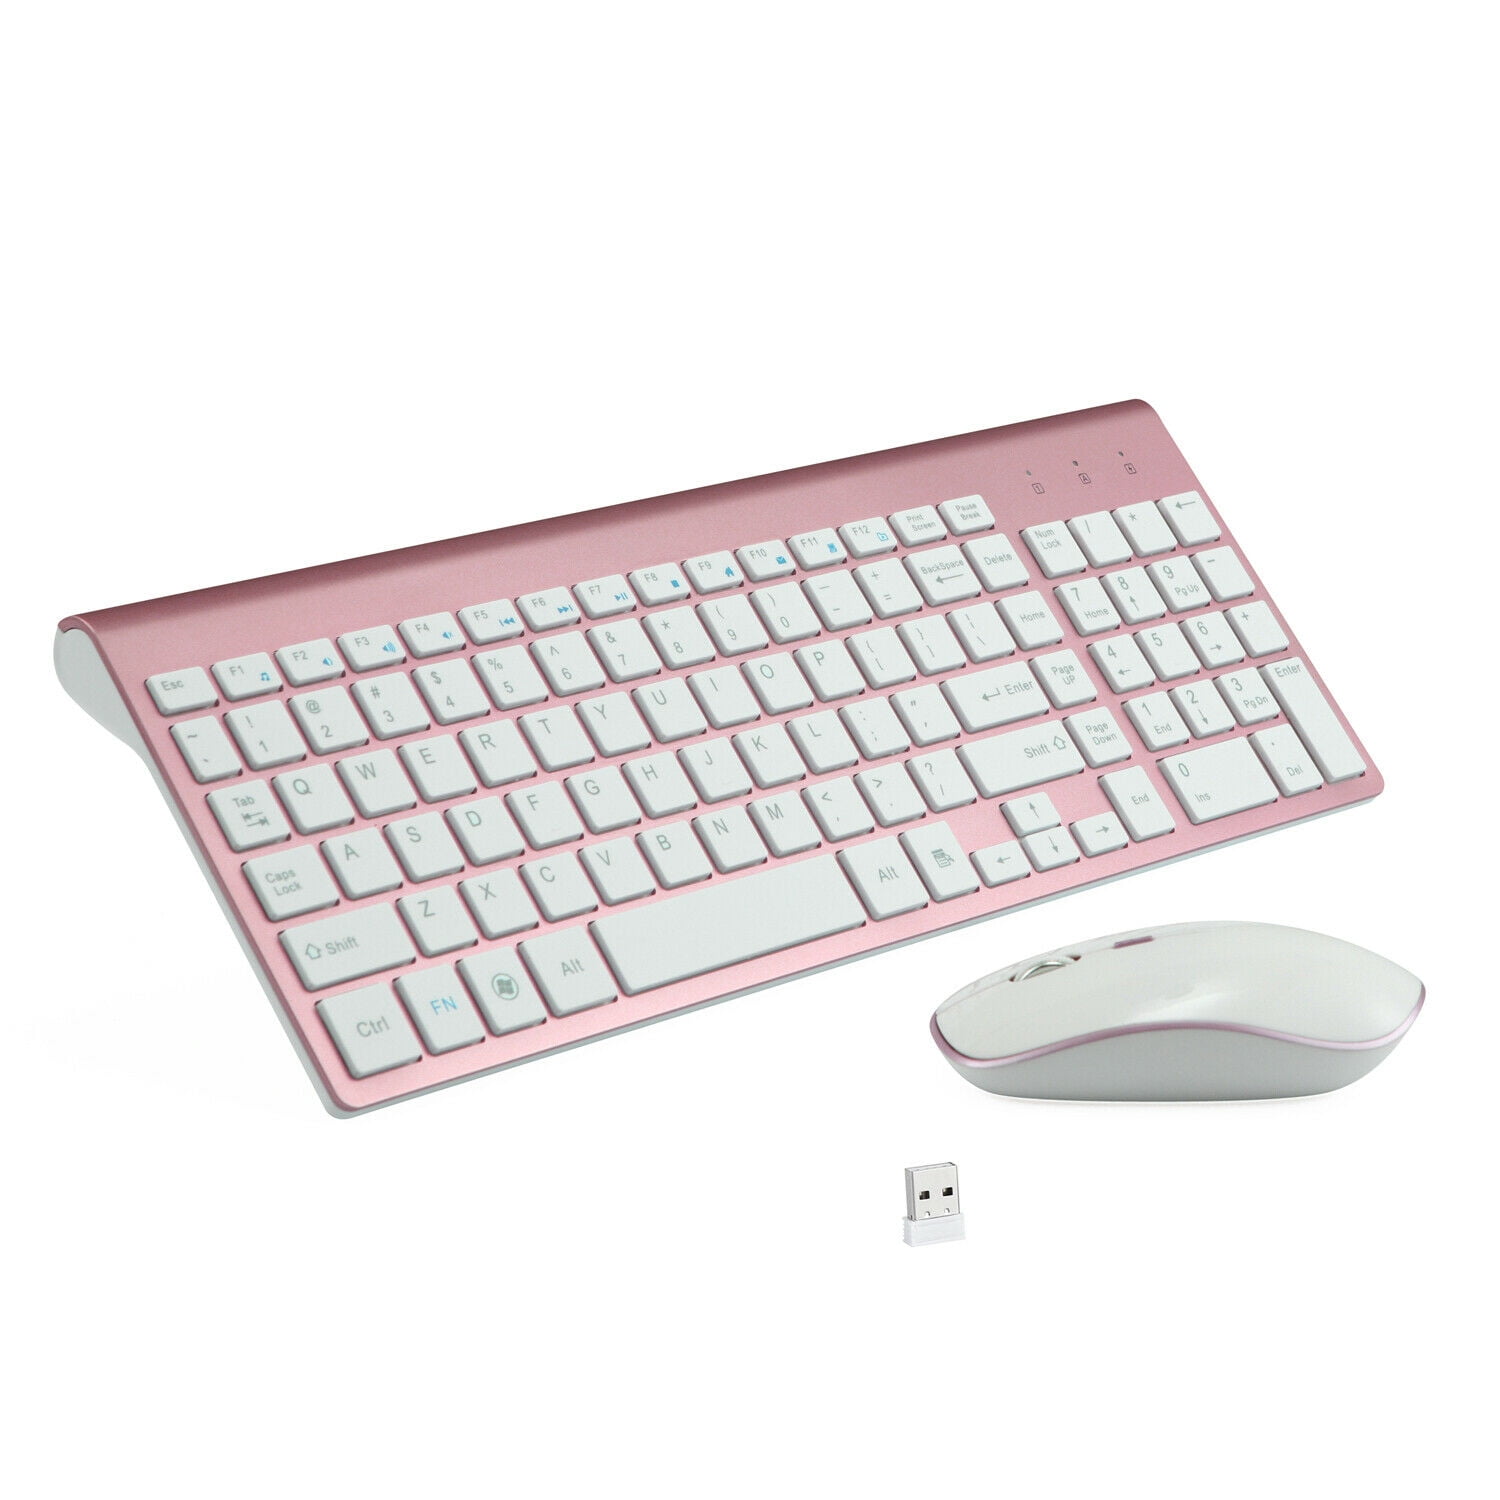 Wireless Keyboard And Mouse Bundle Combo Set For Mac Apple Full Size 2.4G Slim 